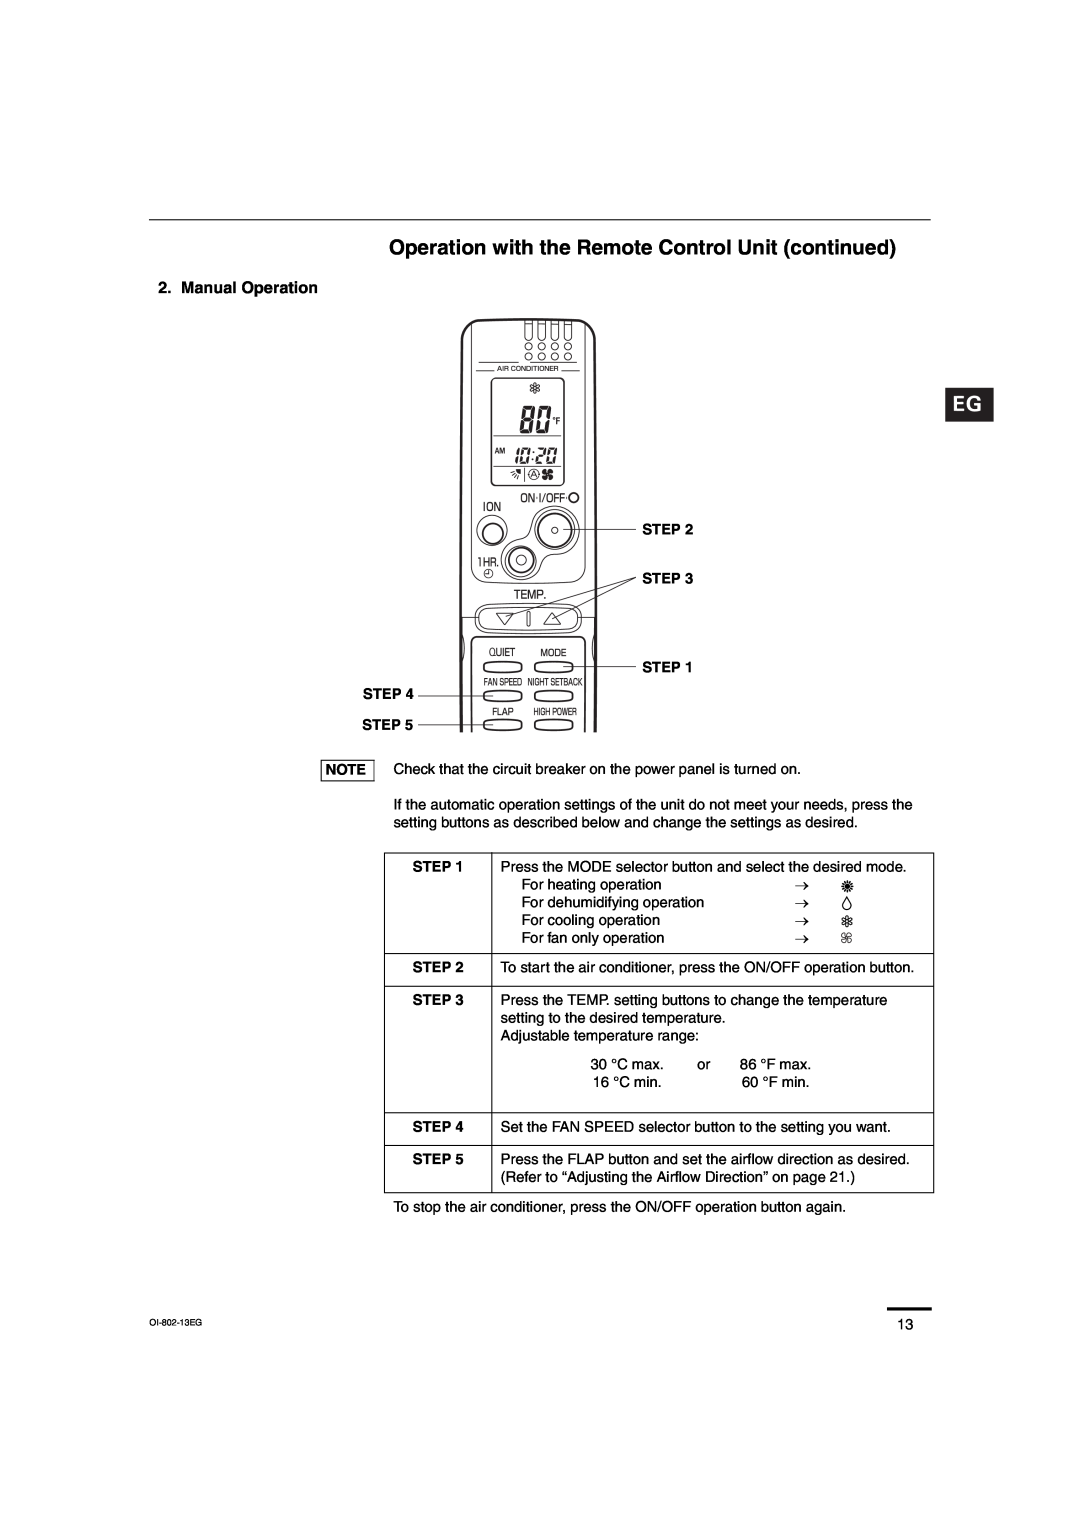 Sanyo CH1271, CH0971 service manual Operation with the Remote Control Unit continued, Manual Operation 